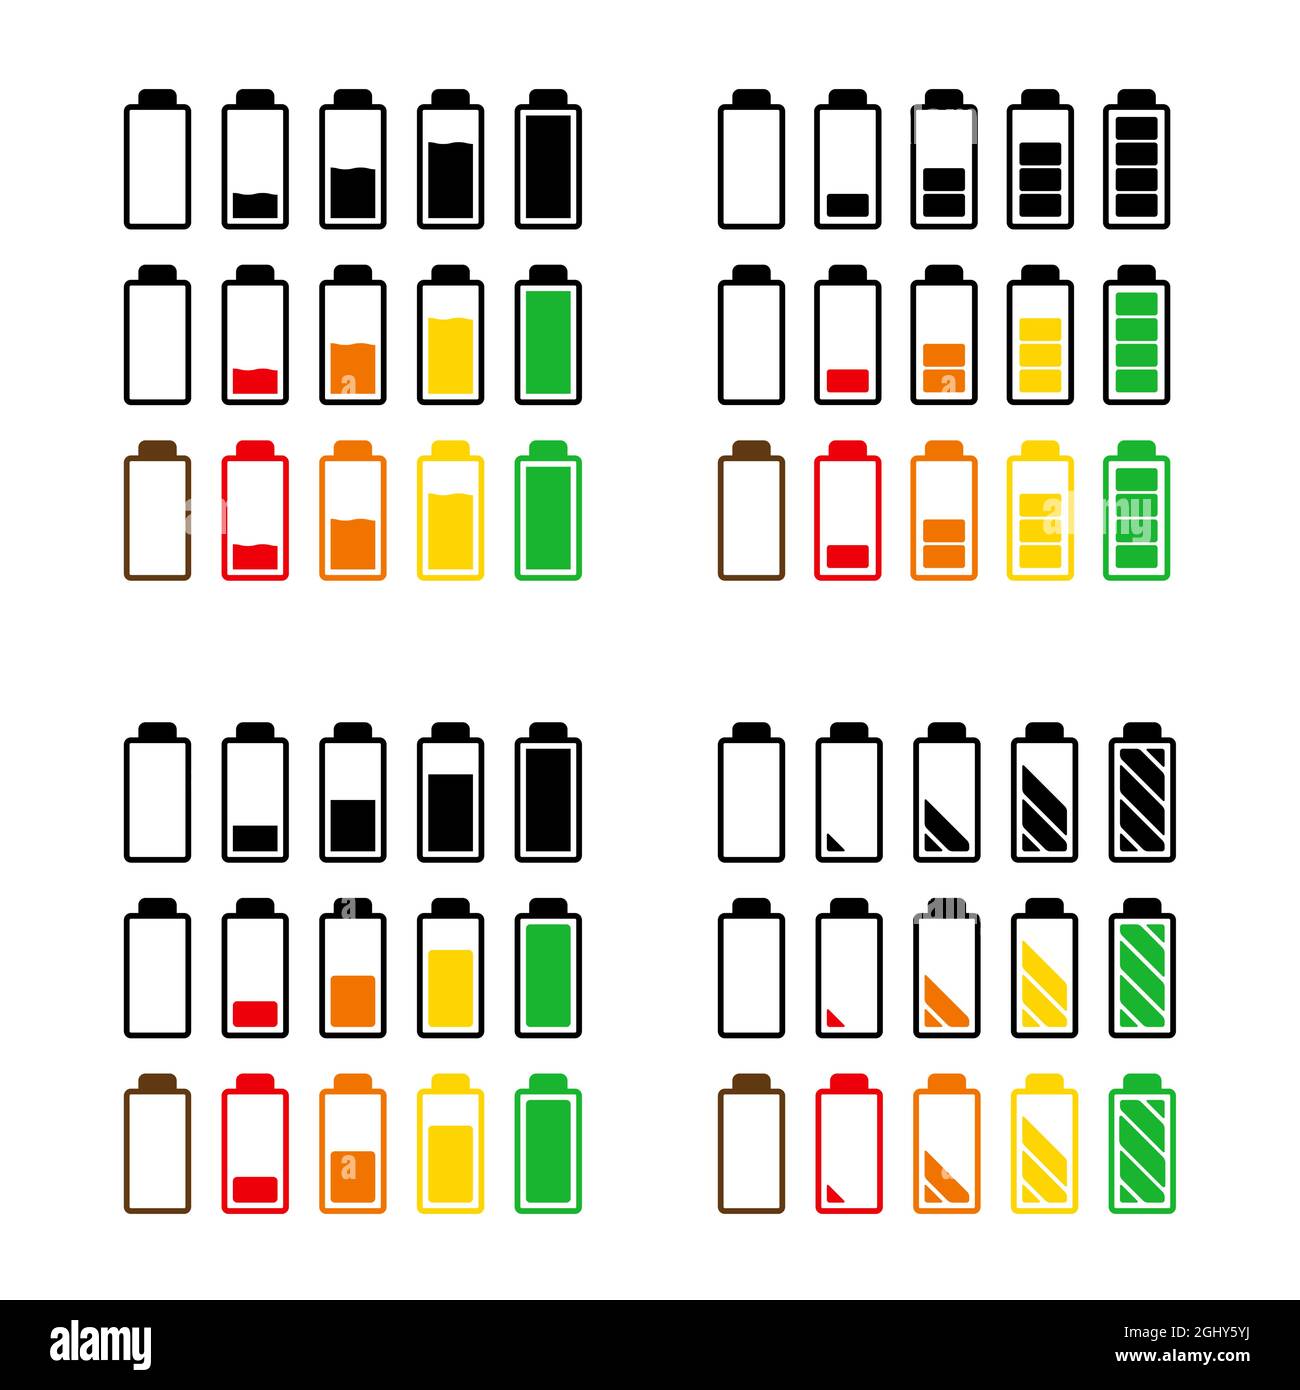 Battery charge level icon set. Symbol of power indicator of mobile phone accumulator.  Simple flat design. Vector illustration isolated on white. Stock Vector